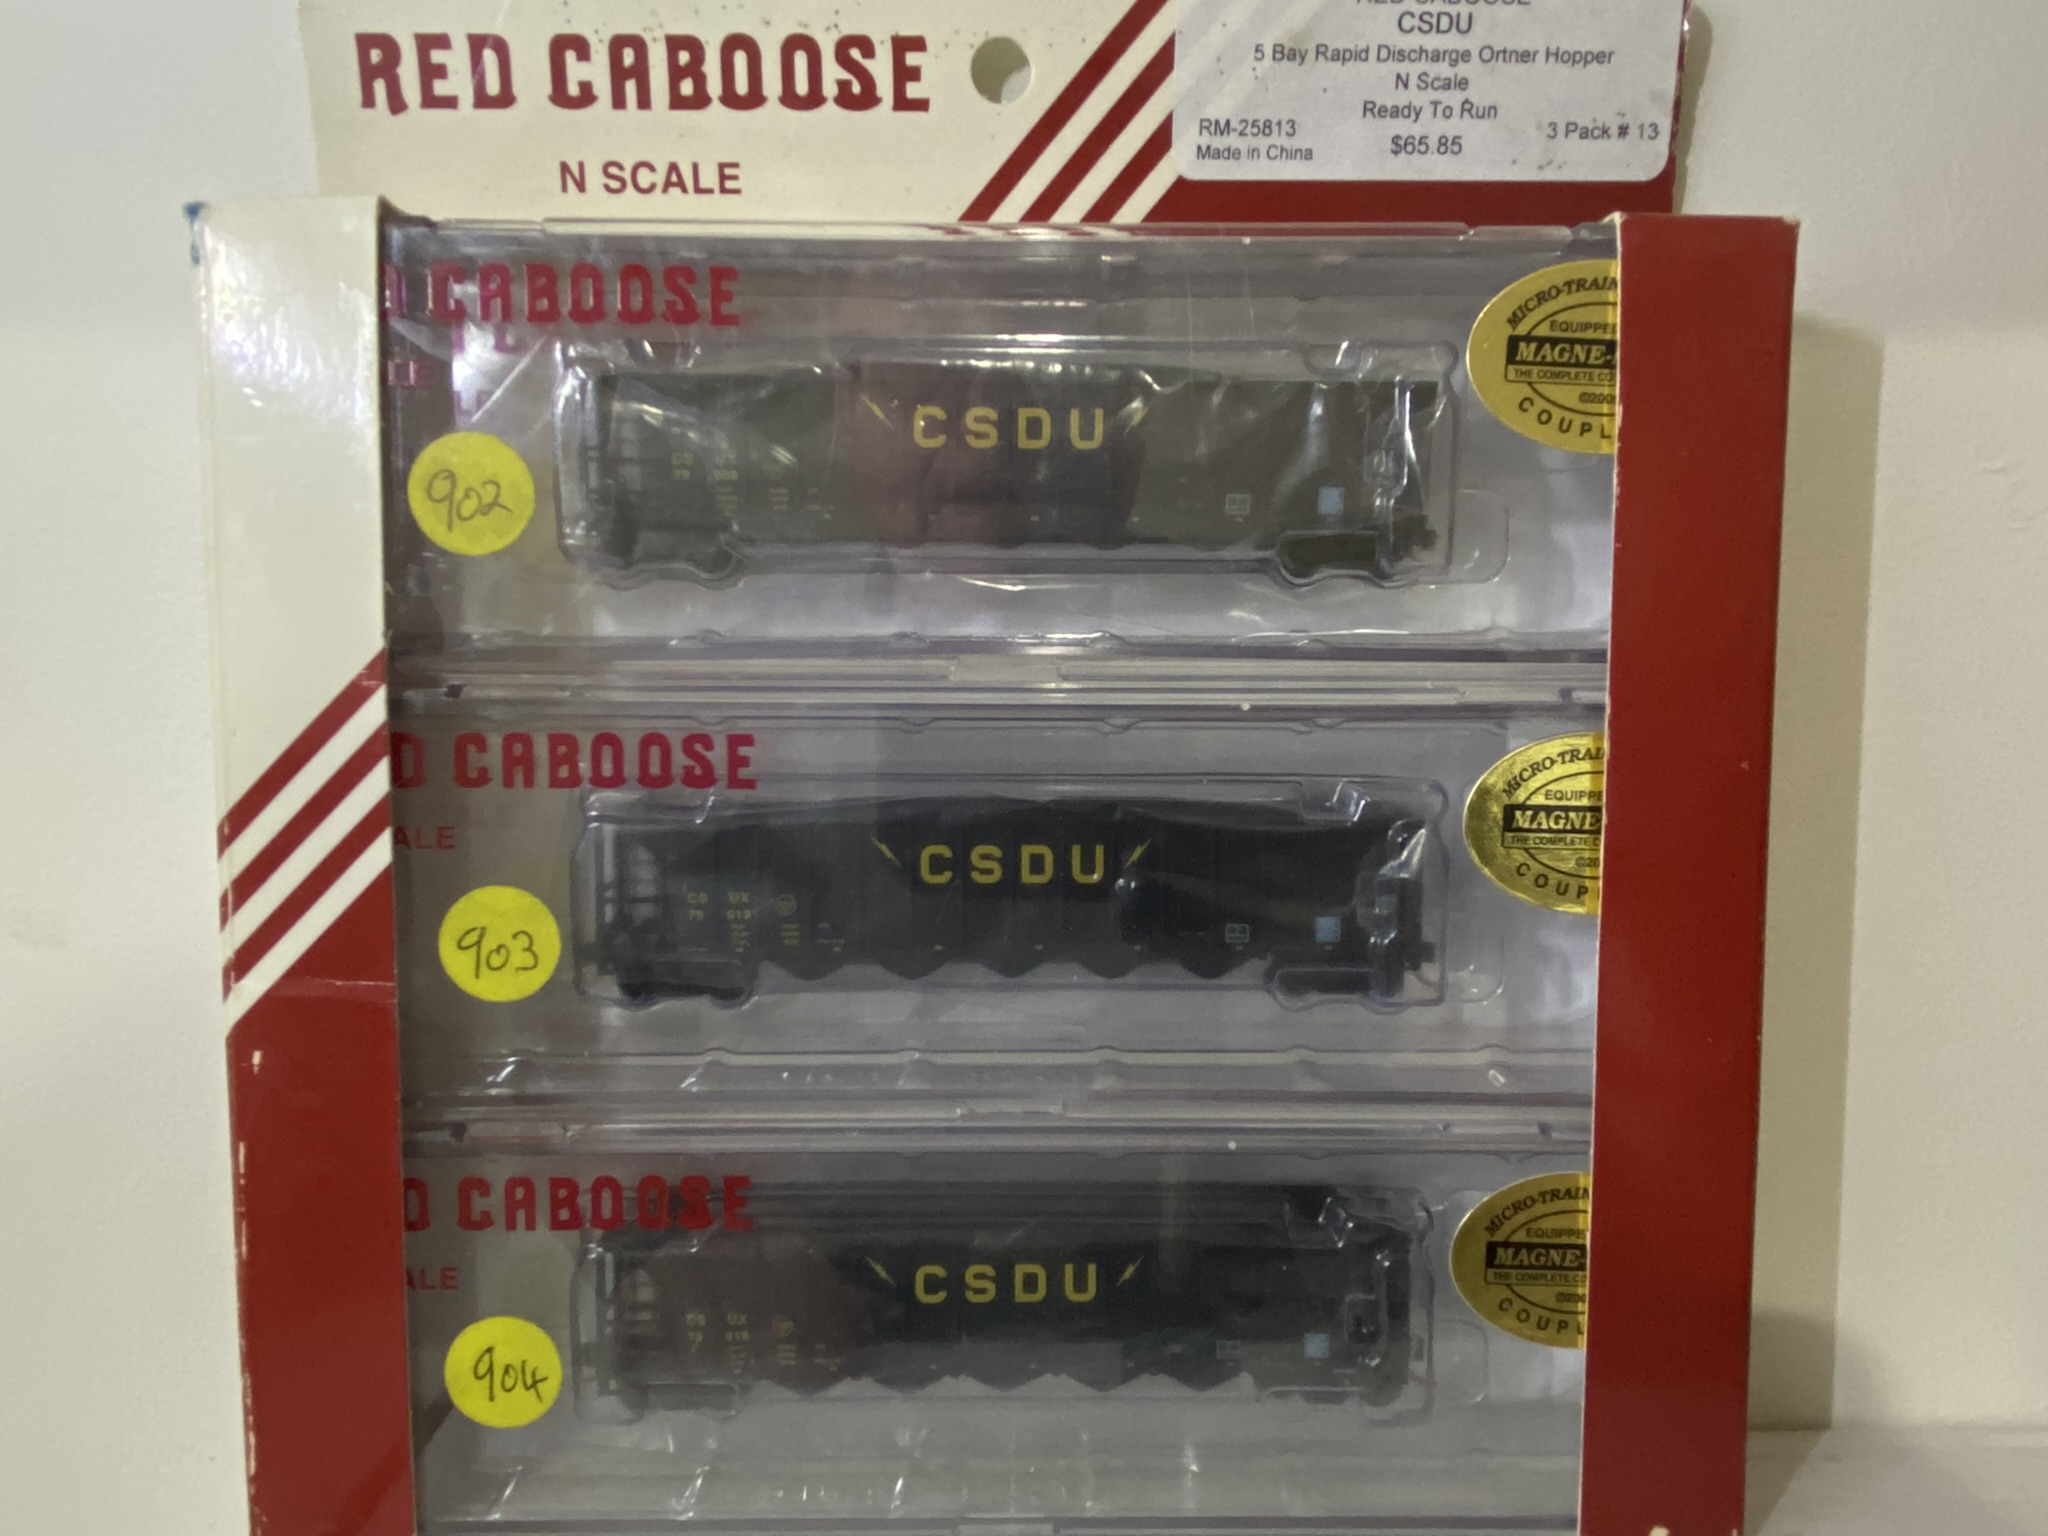 Red Caboose 25813: 5 Bay Rapid Discharge Ortner Hopper Car with load, CSDU.